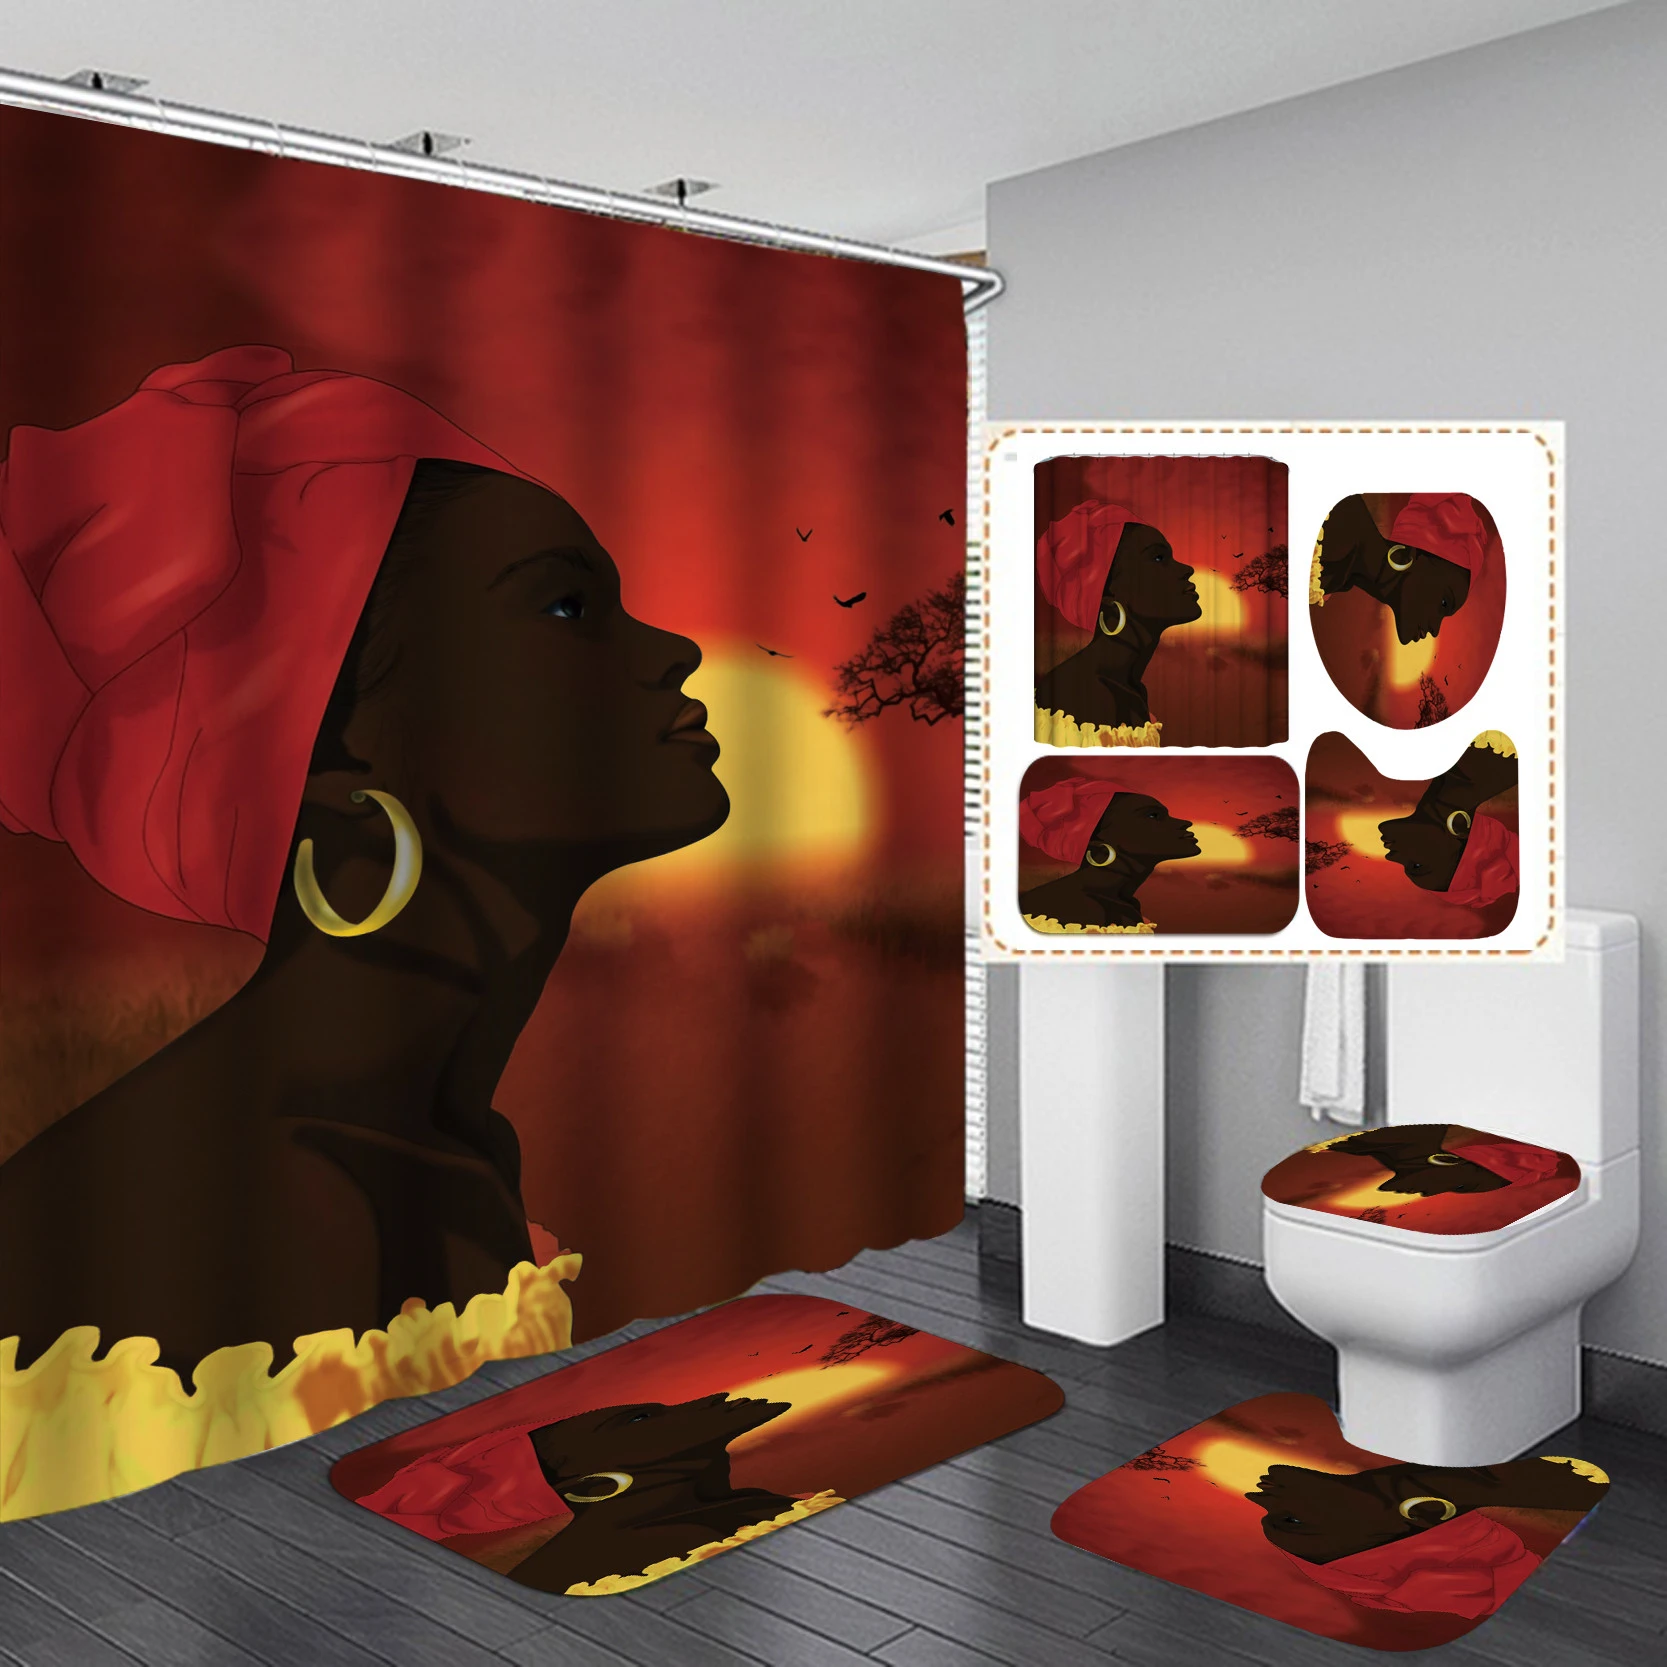 Sexy African Women Girl Waterproof Shower Curtain, Digital Print Polyester Non-Slip Rug Toilet Lid Cover Bath Shower Curtain/